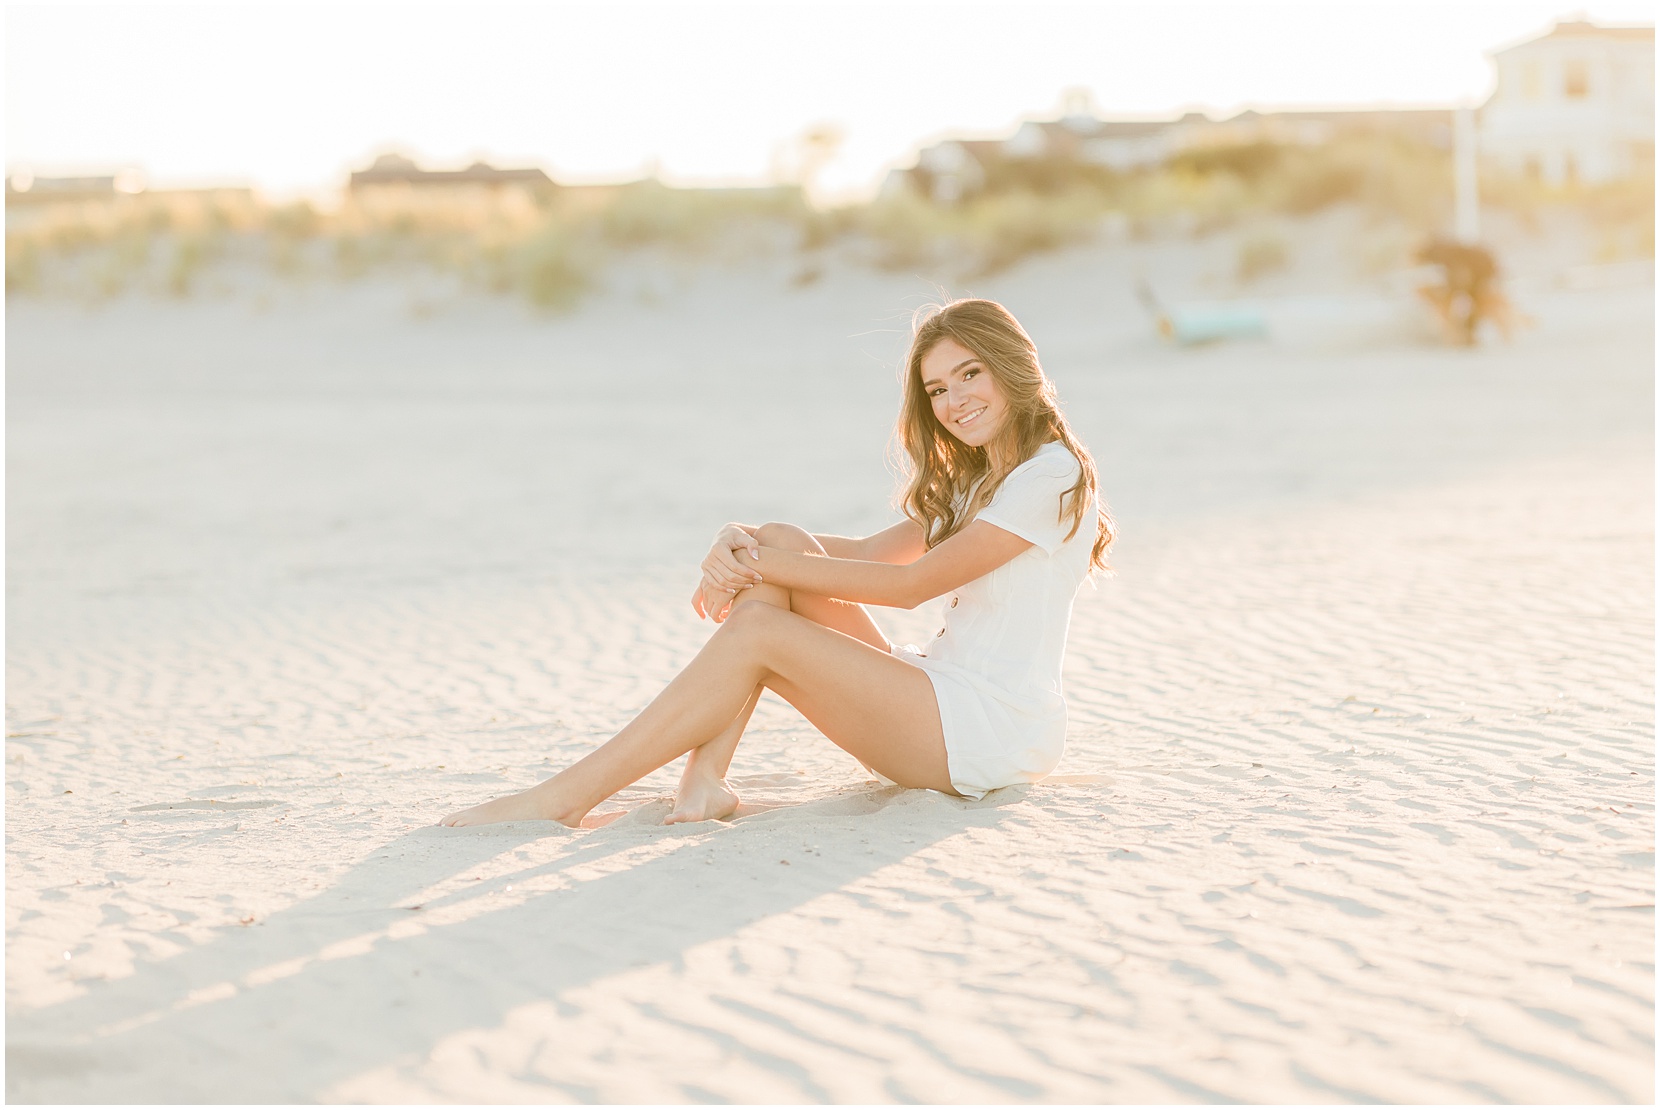 high school senior posing for senior pictures on the beach in ocean city new jersey. she is wearing a white romper. The sun is golden!